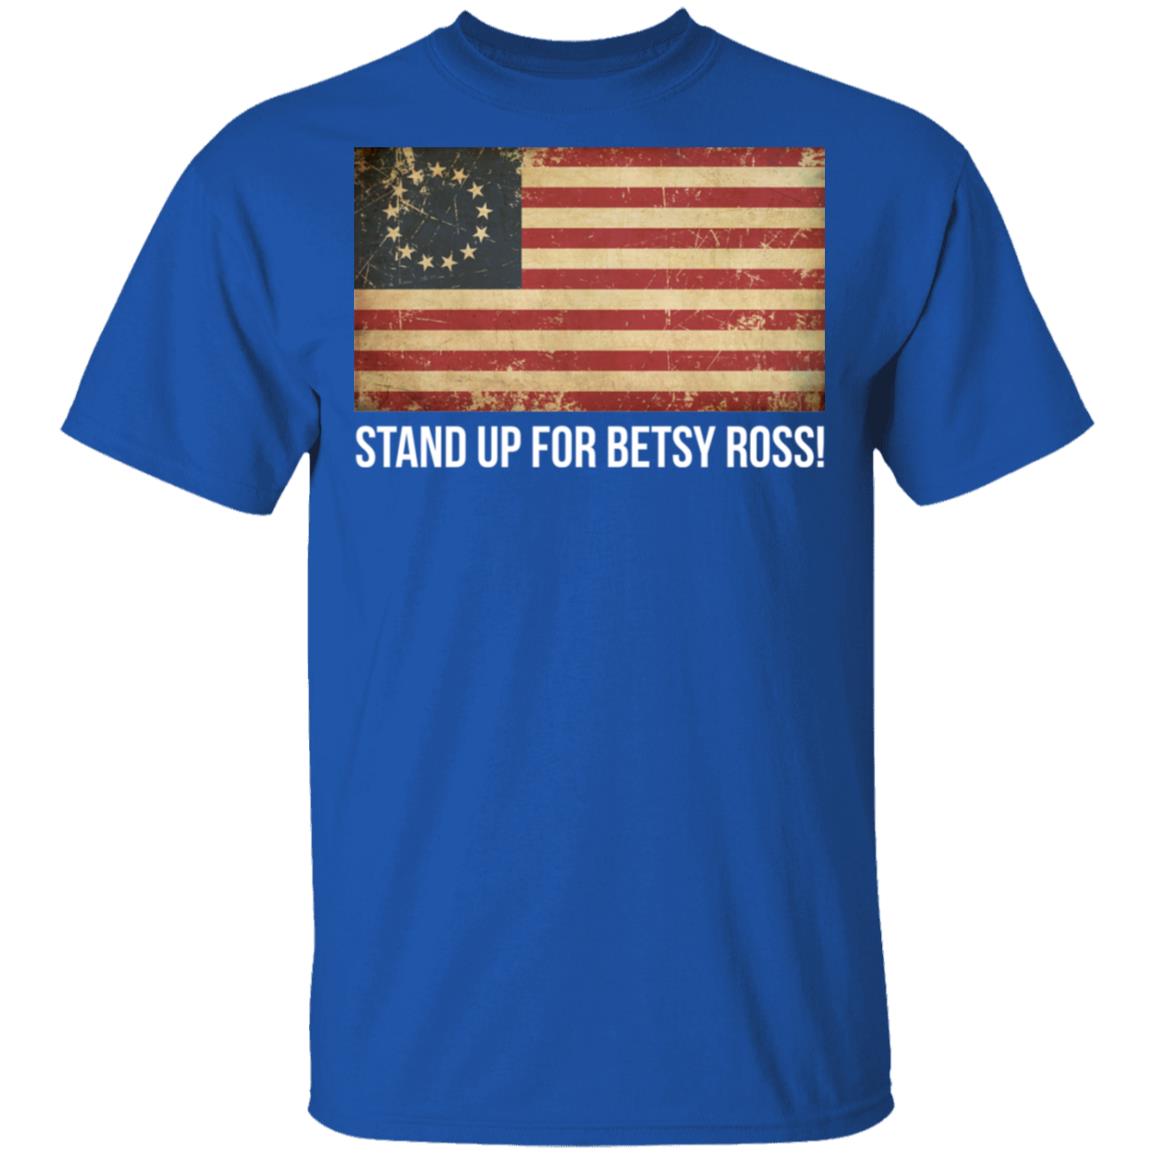 Stand up for B Ross 1776 The Rush Limbaugh Show t-shirt by To-Tee  Clothing - Issuu